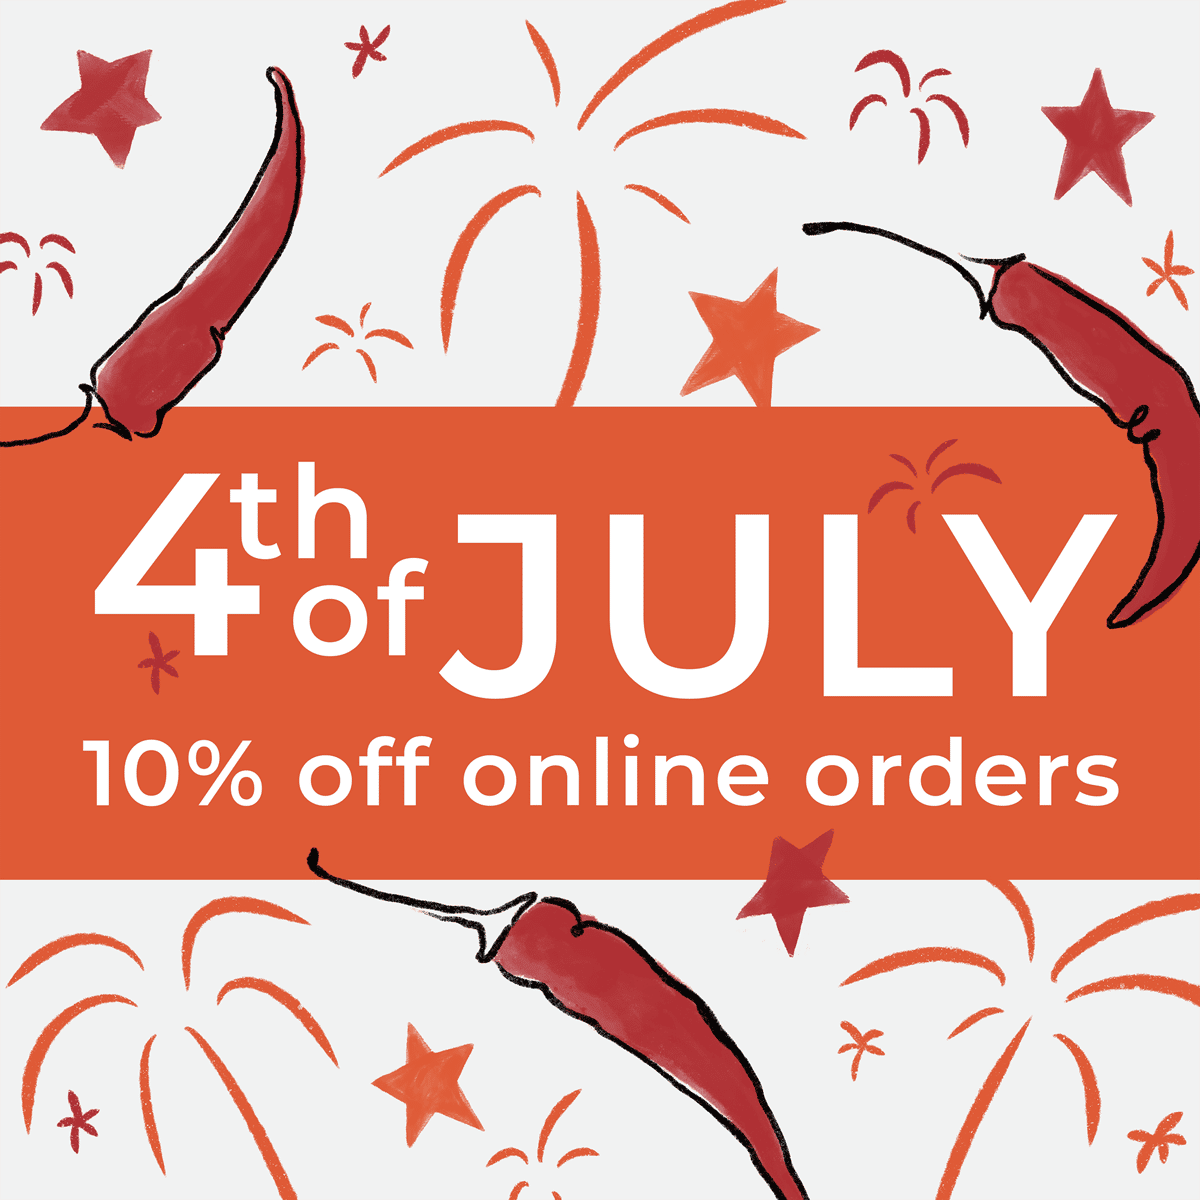 4th of July 10% off online orders